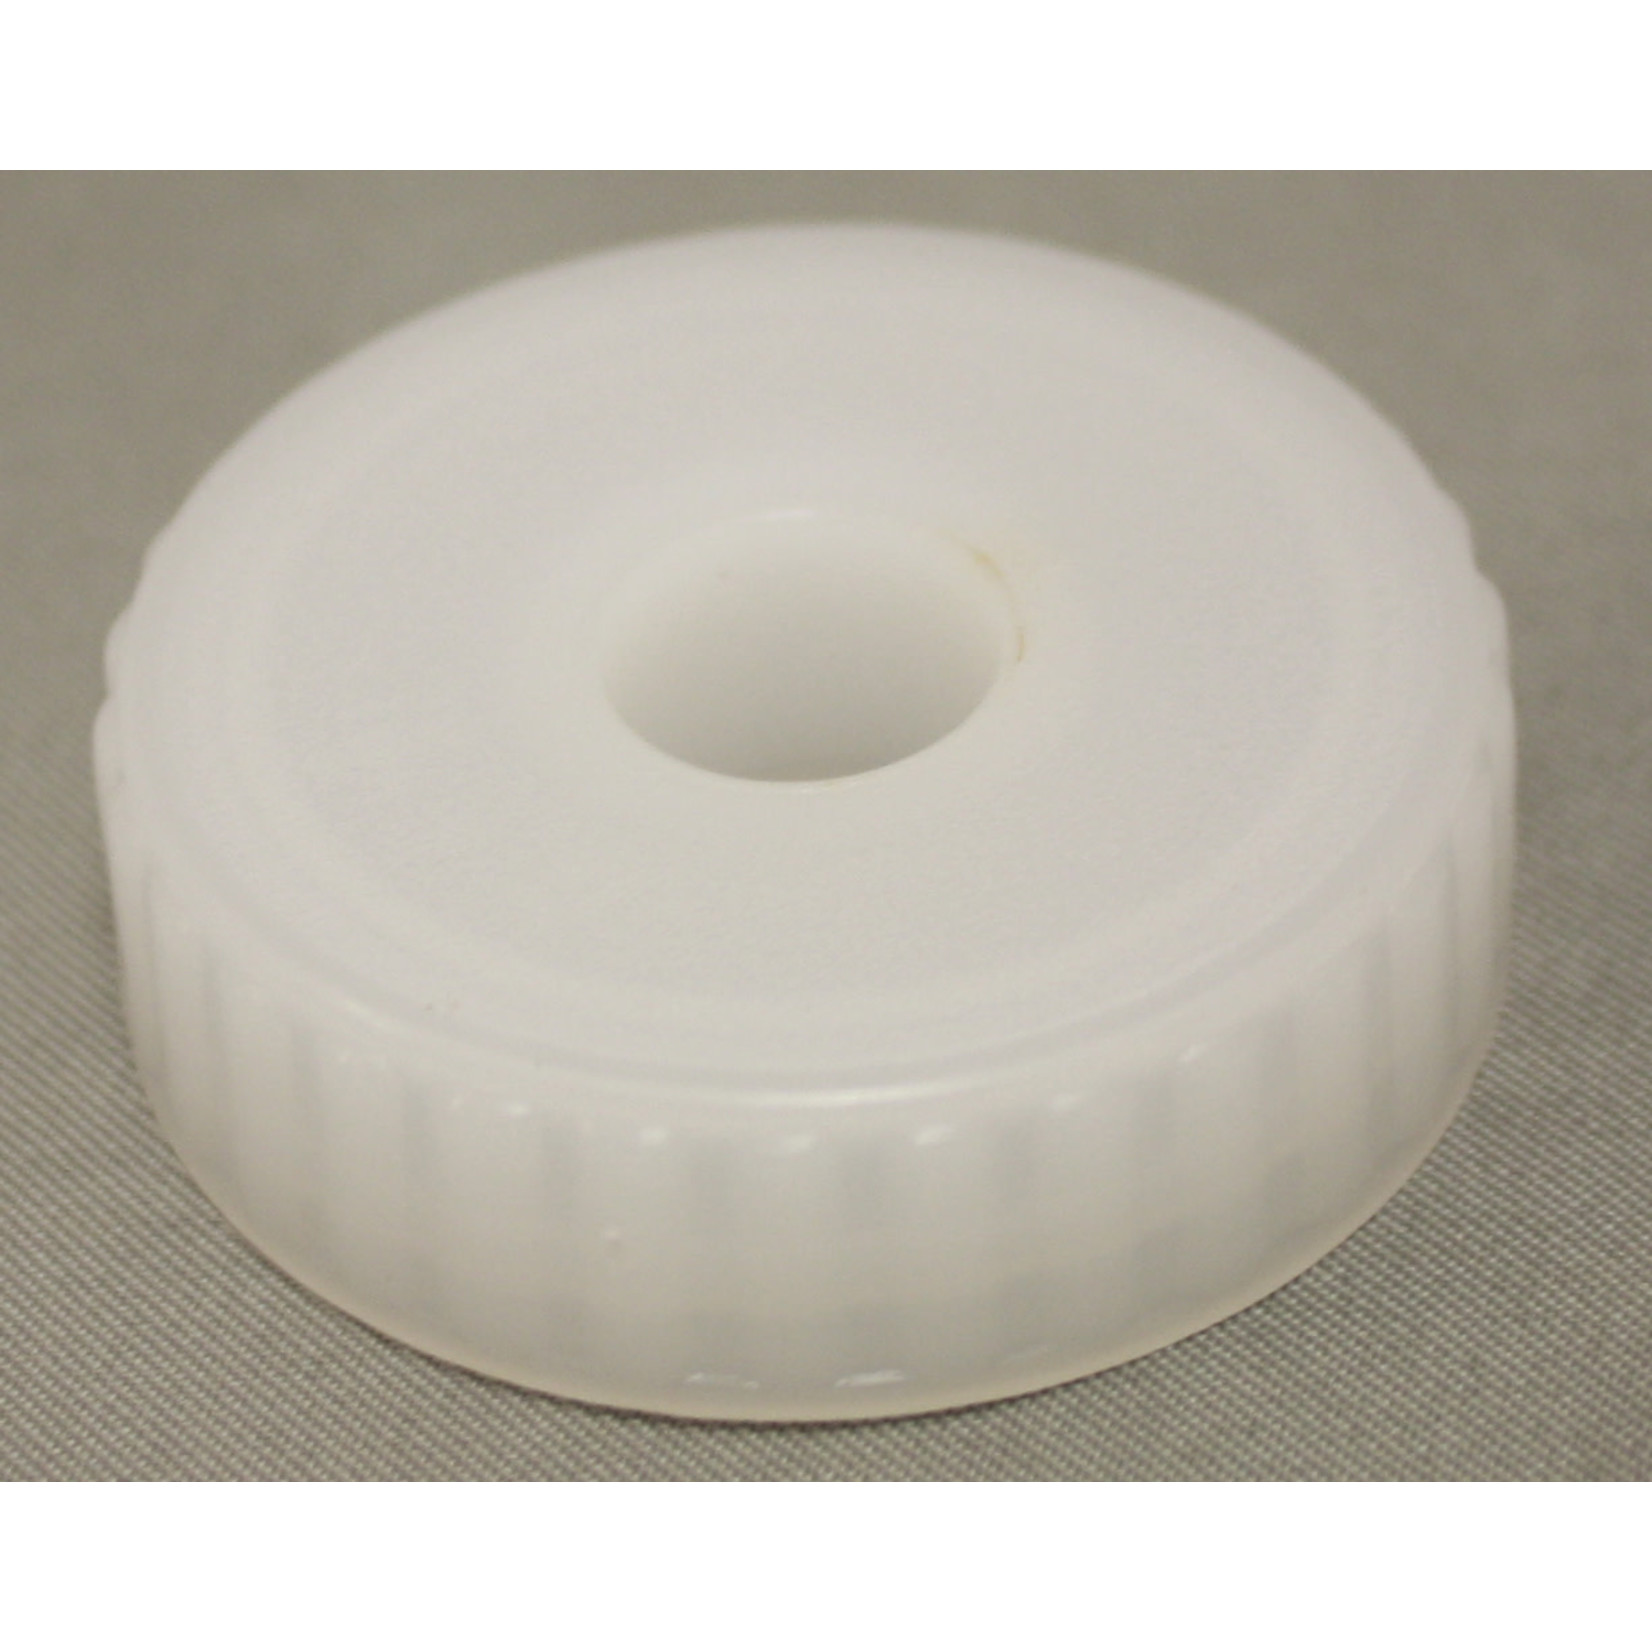 38mm Screw Cap with Hole Fits Gal Jug